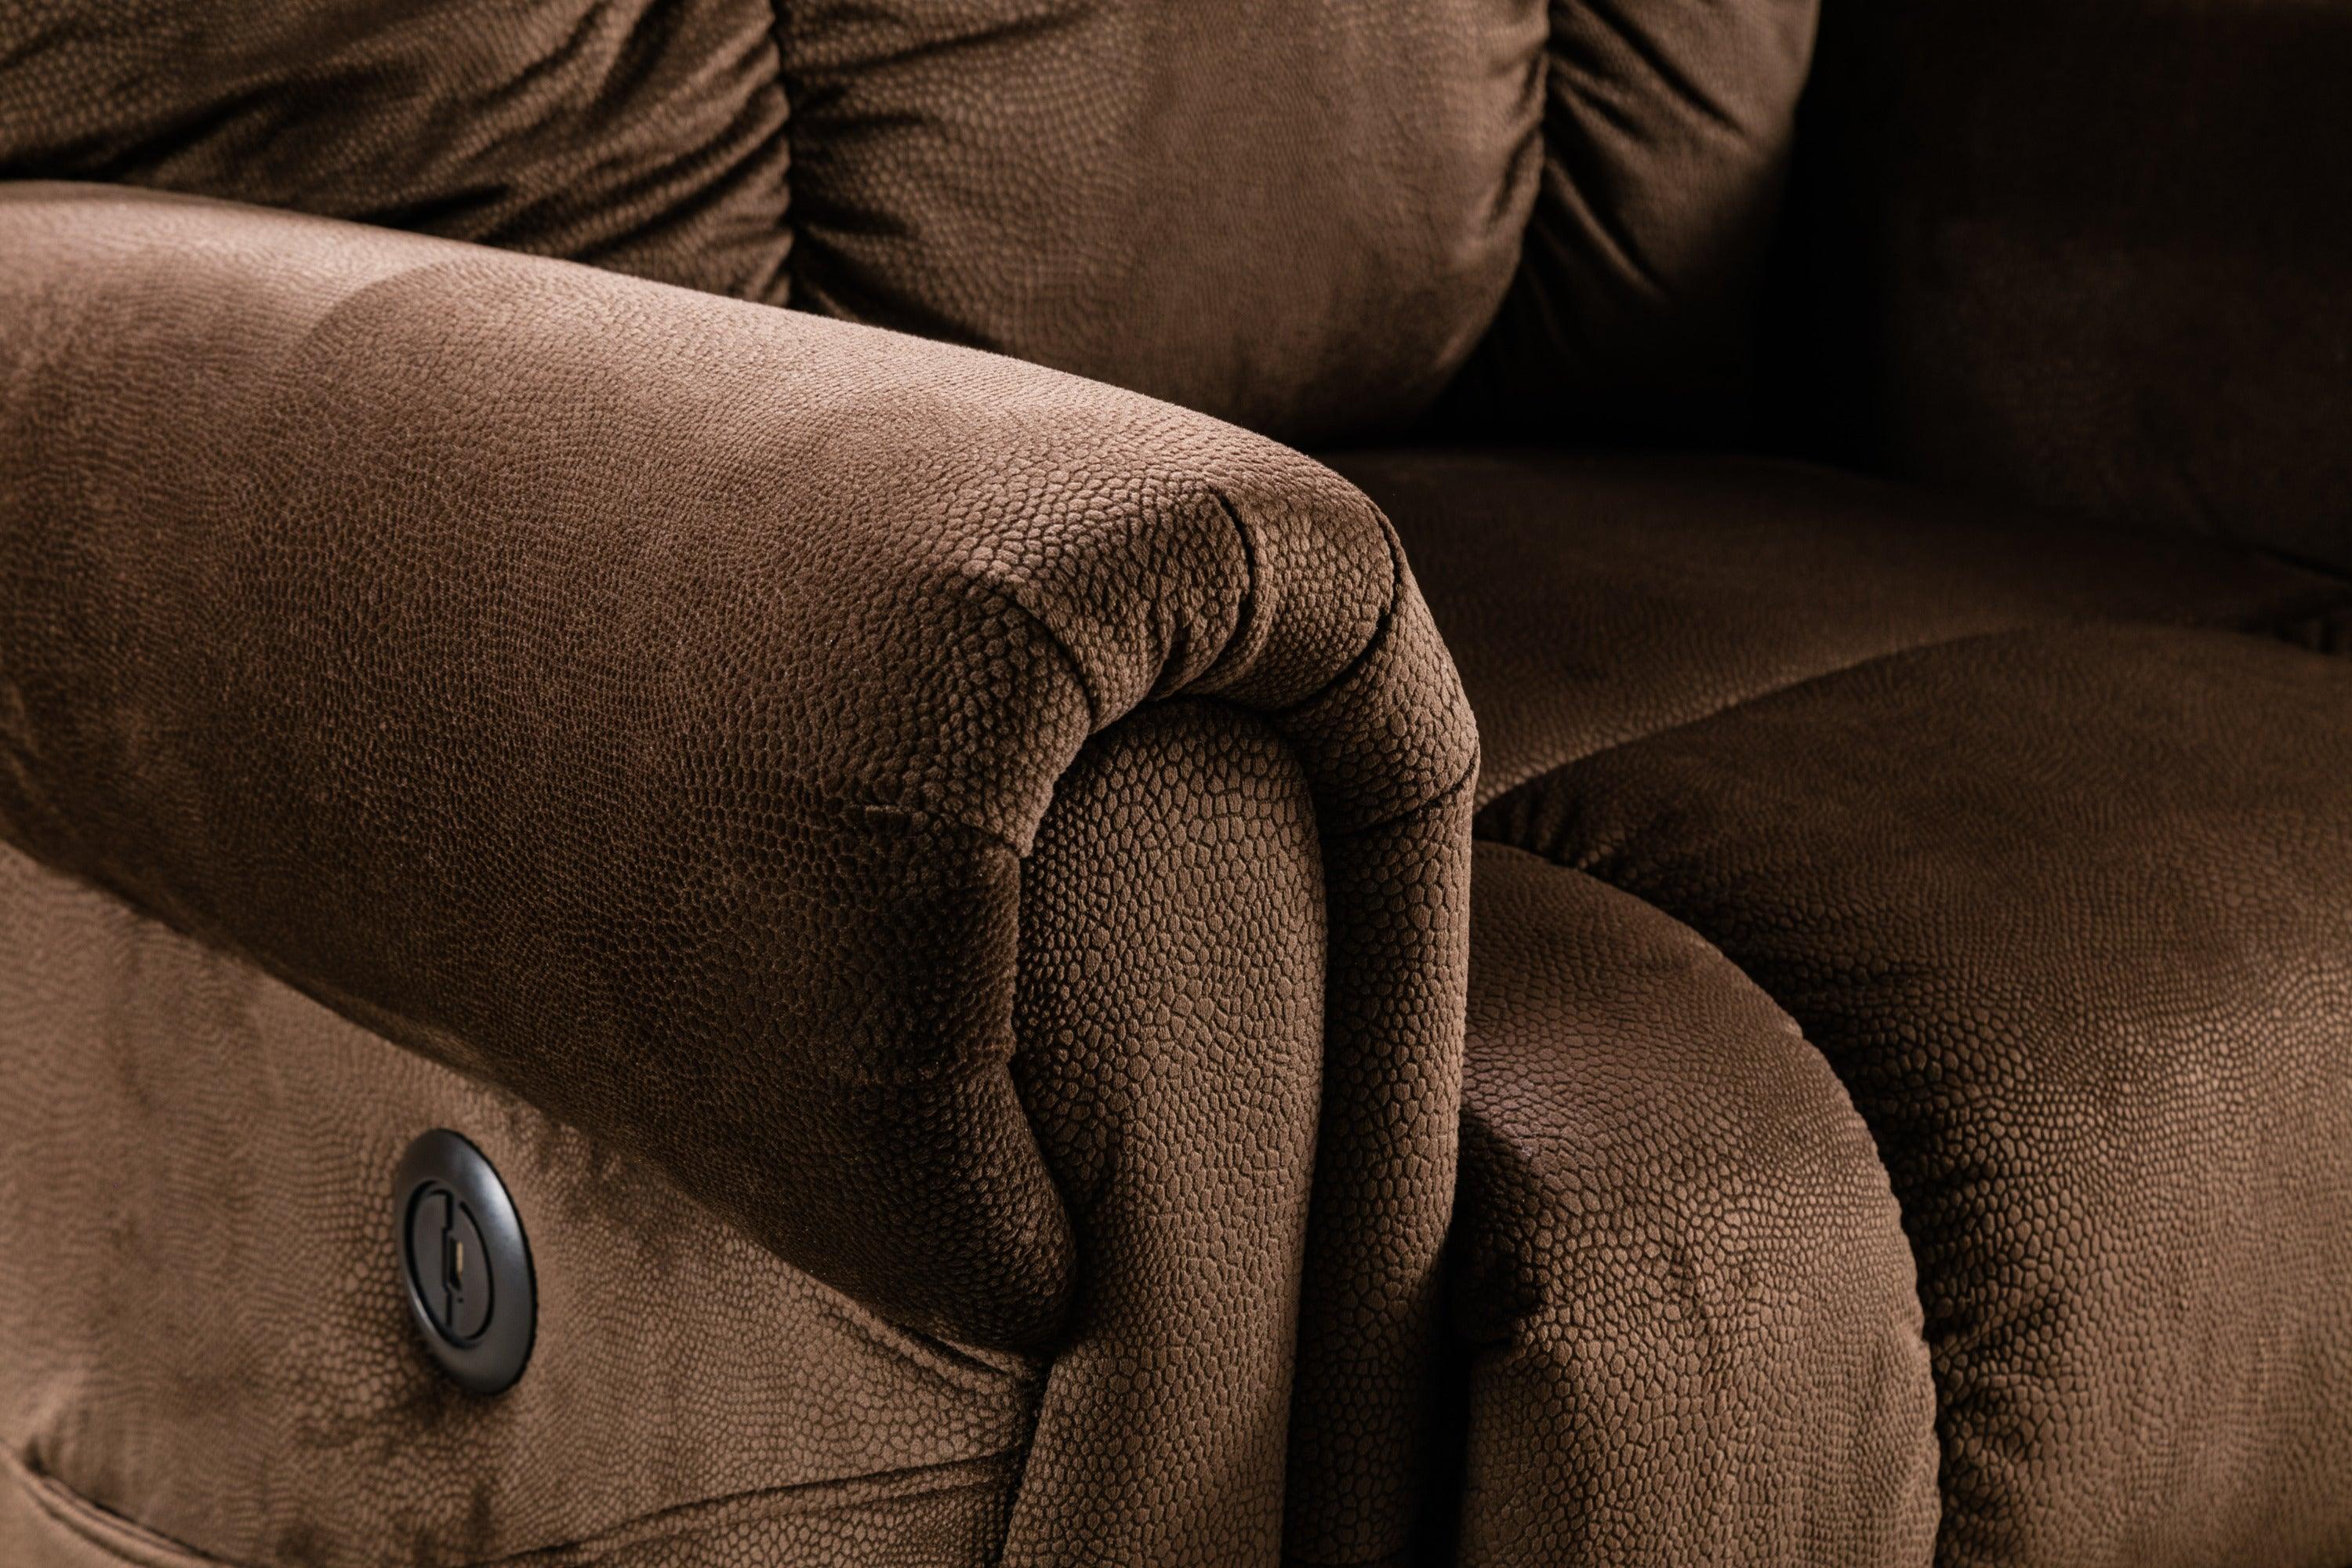 Ultra-Wide Power Lift Recliner with Heat and Massage Therapy, arm rest close up